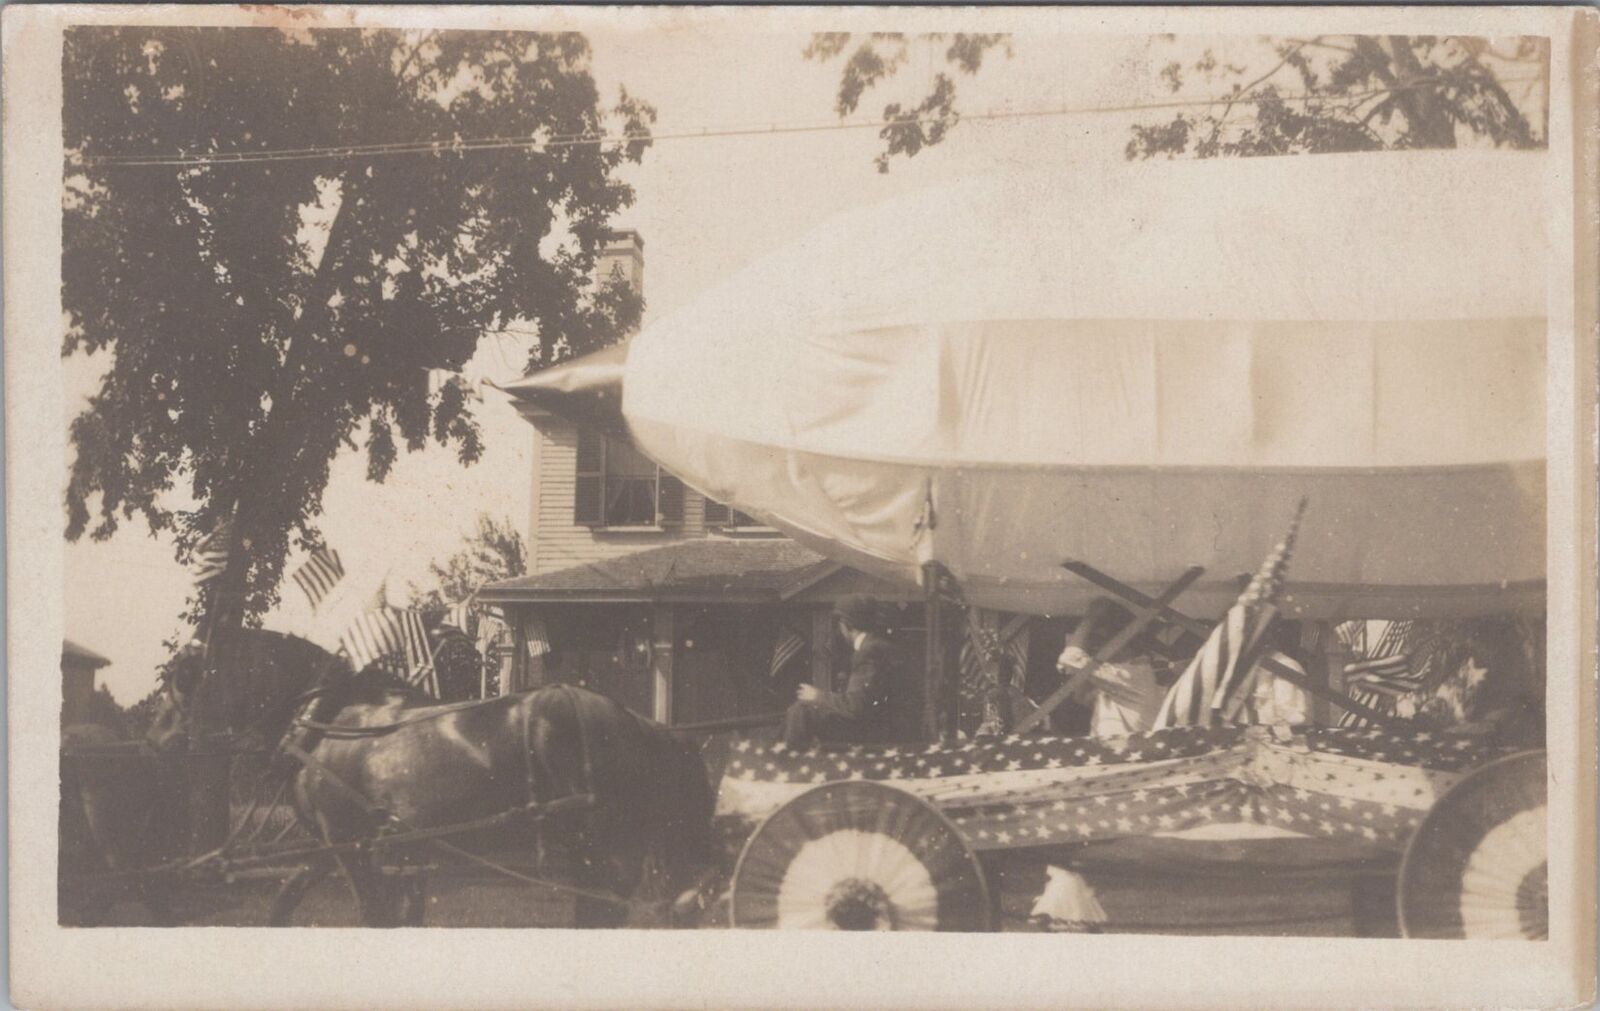 4th of July Dirigible Float Horse Carriage Baby Zeppelin 1910 RPPC Postcard